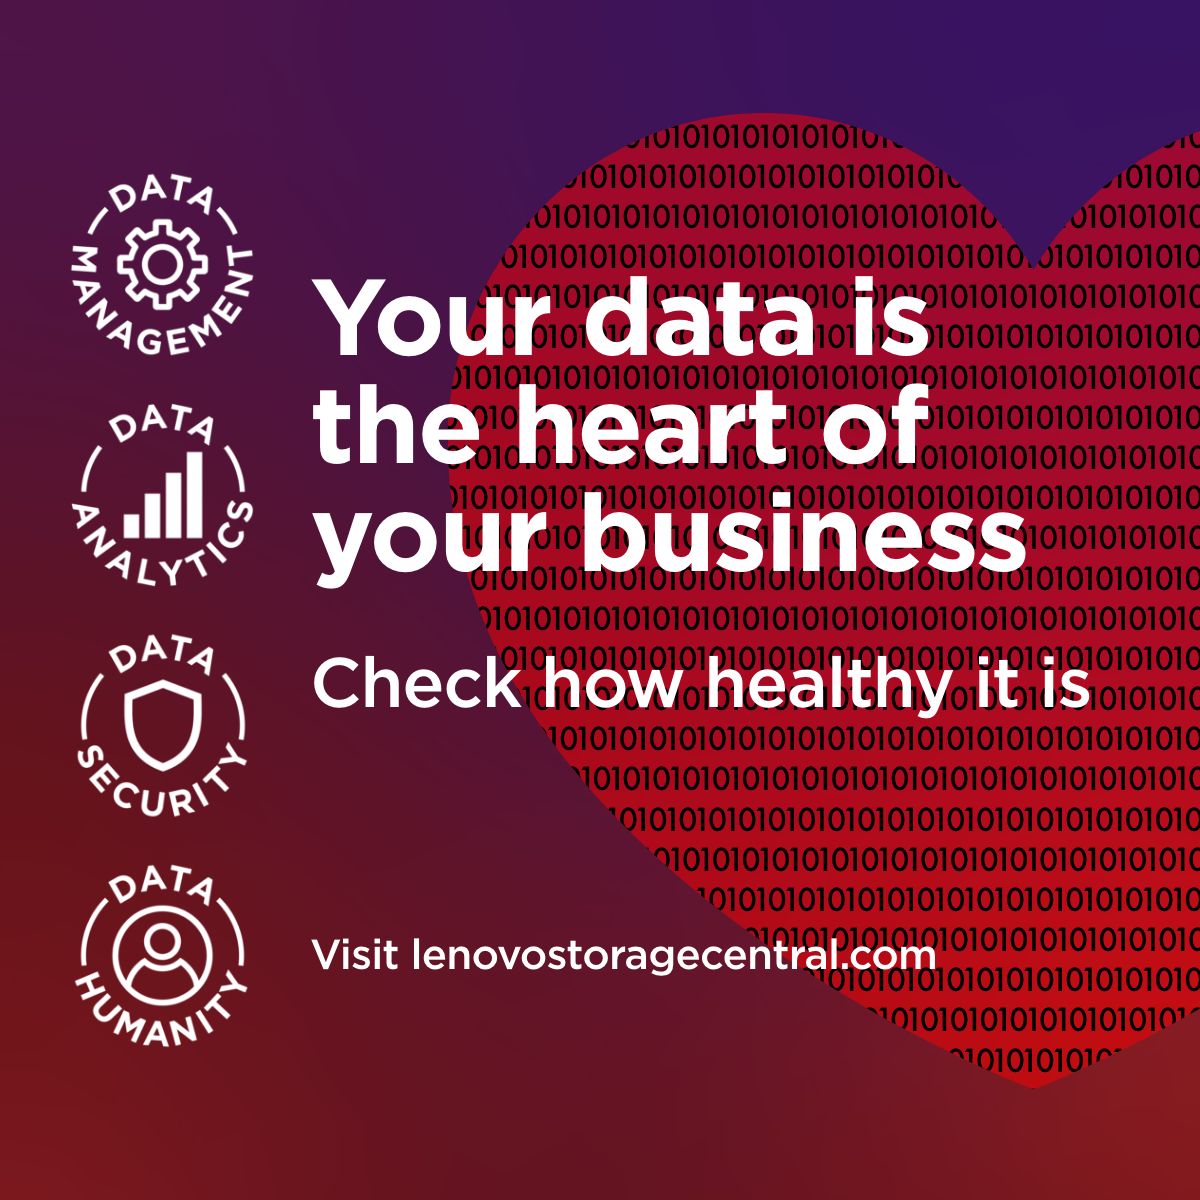 Understanding your data management alignment with business goals is crucial. Learn more with Lenovo's Data Health Check quiz to assess your strategy's effectiveness > bit.ly/3JO64Im Paid partnership with @Lenovodc. #DataGovernance